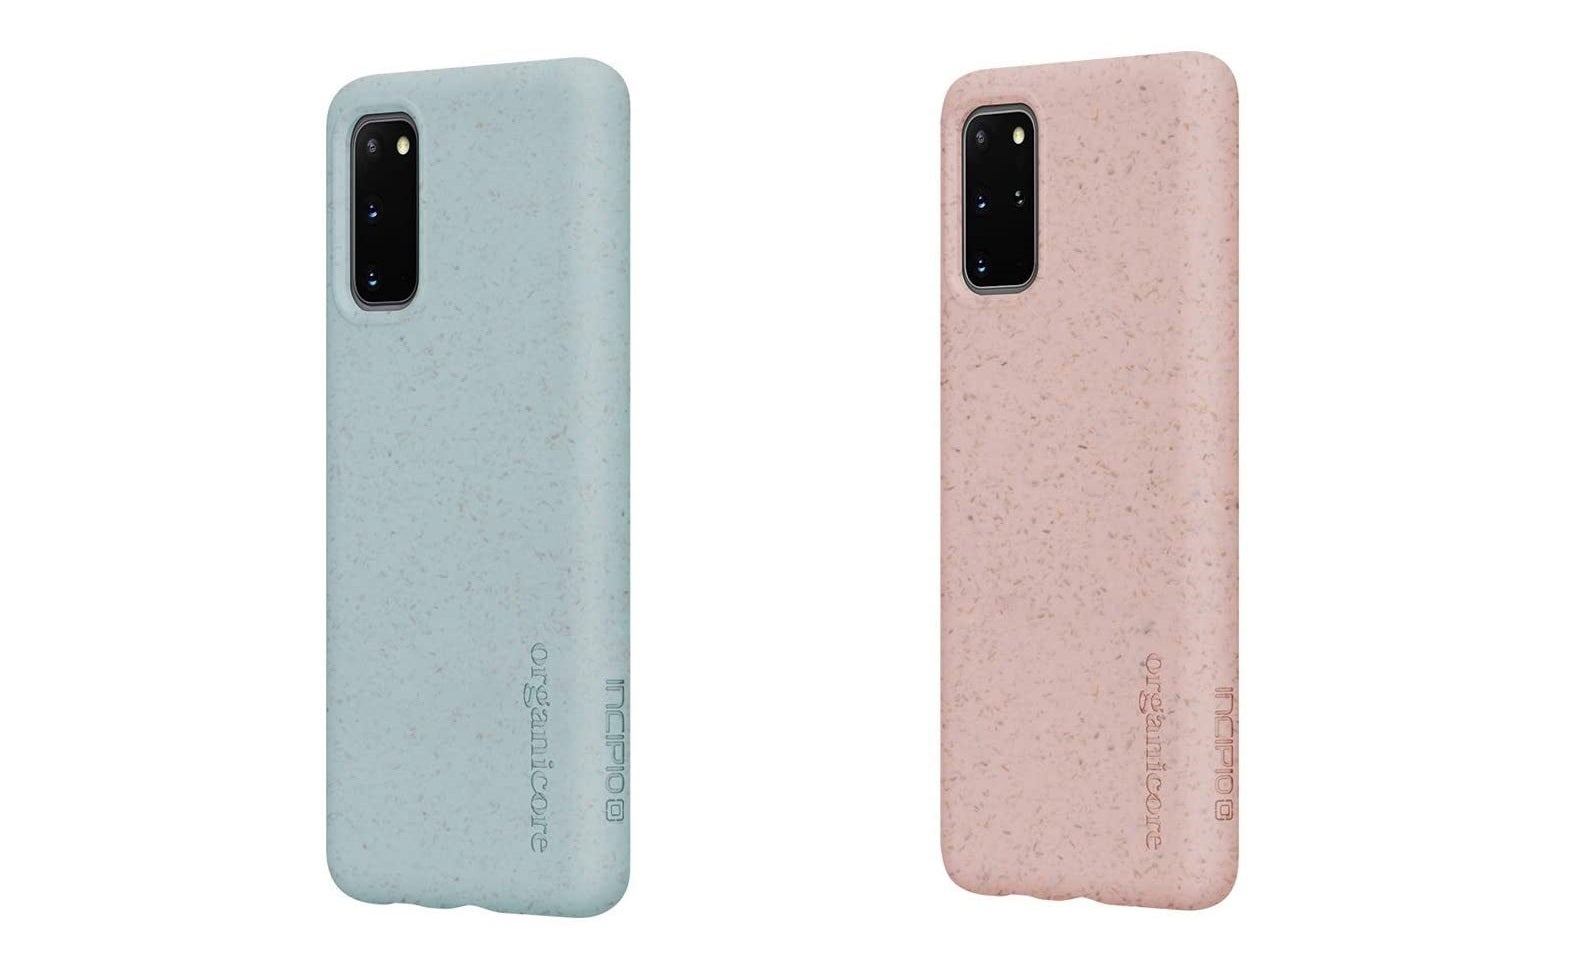 The best Samsung Galaxy S20 and S20 Plus cases